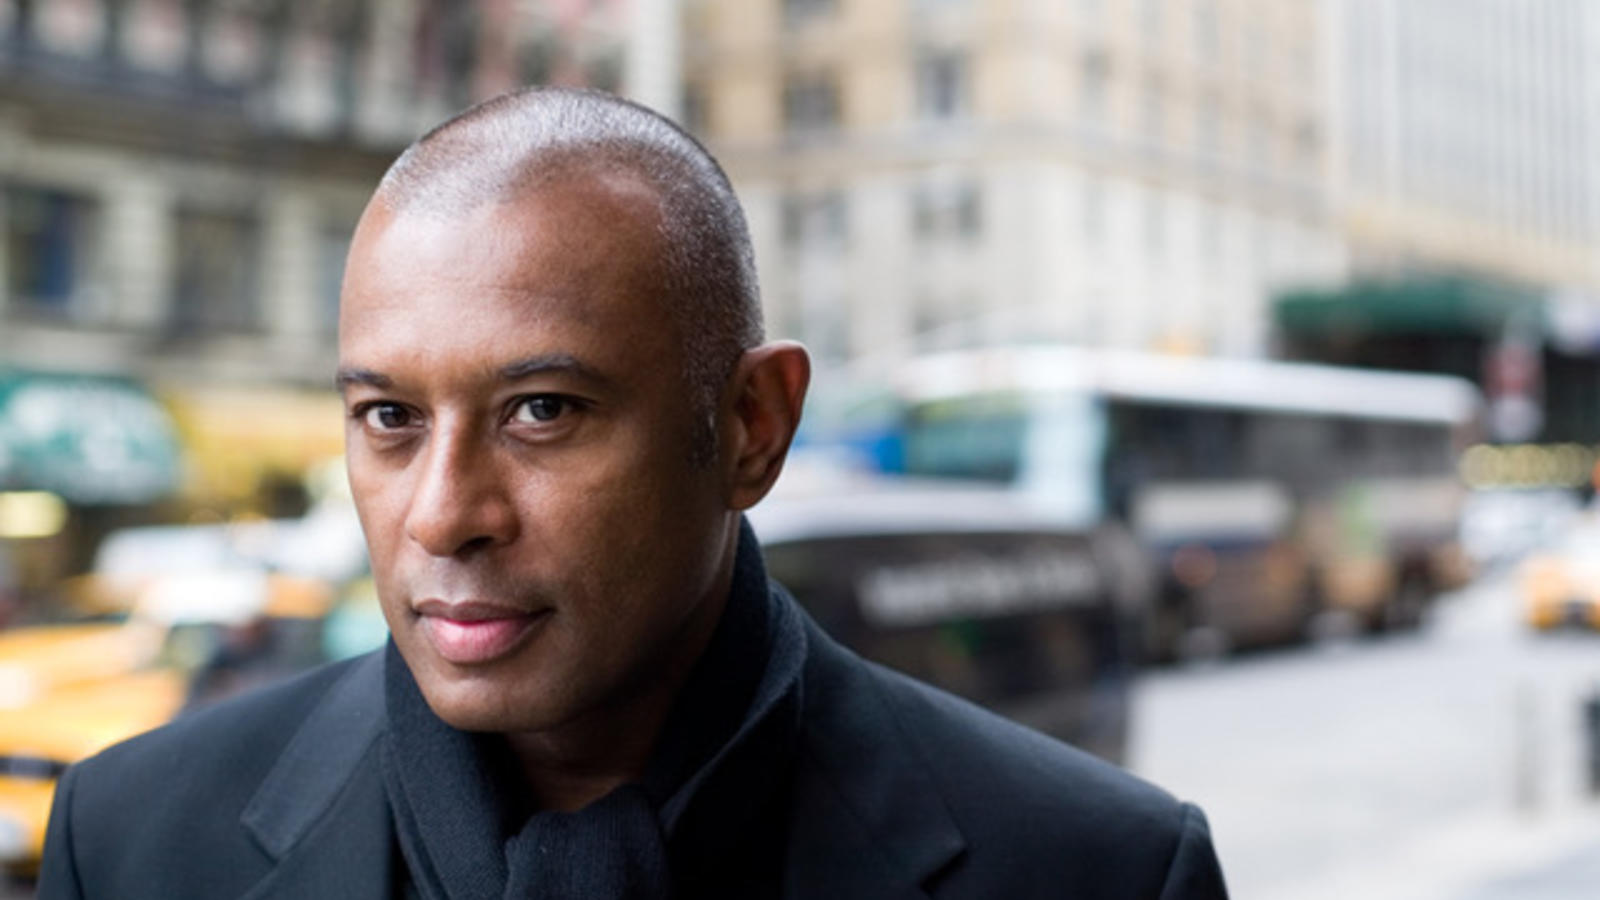 a bald black man outside on a new york street, looking directly into the camera